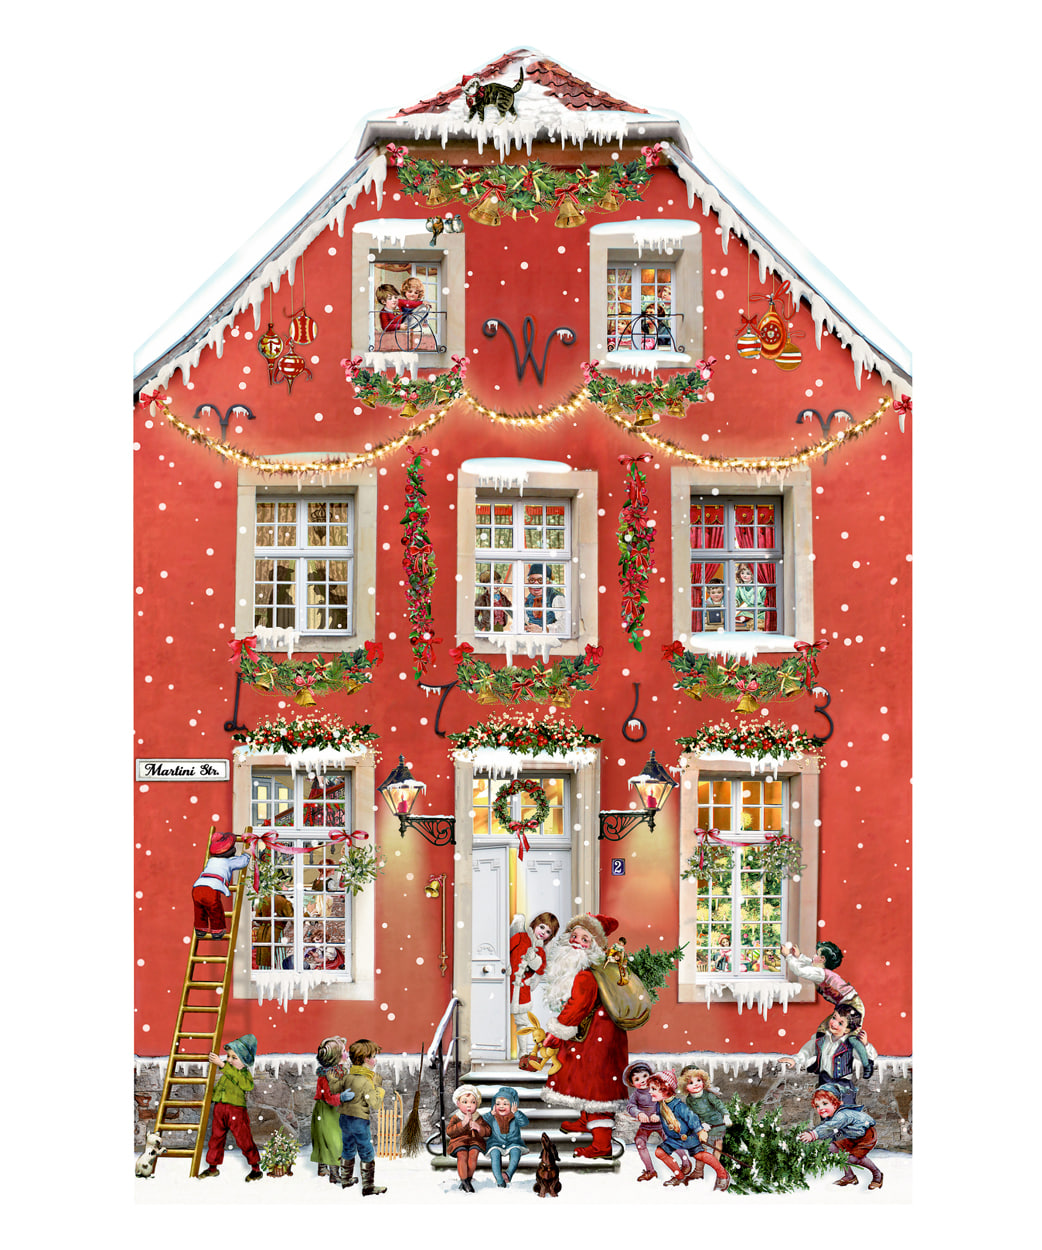 Erde-Party in the Victorian House Advent Calendar